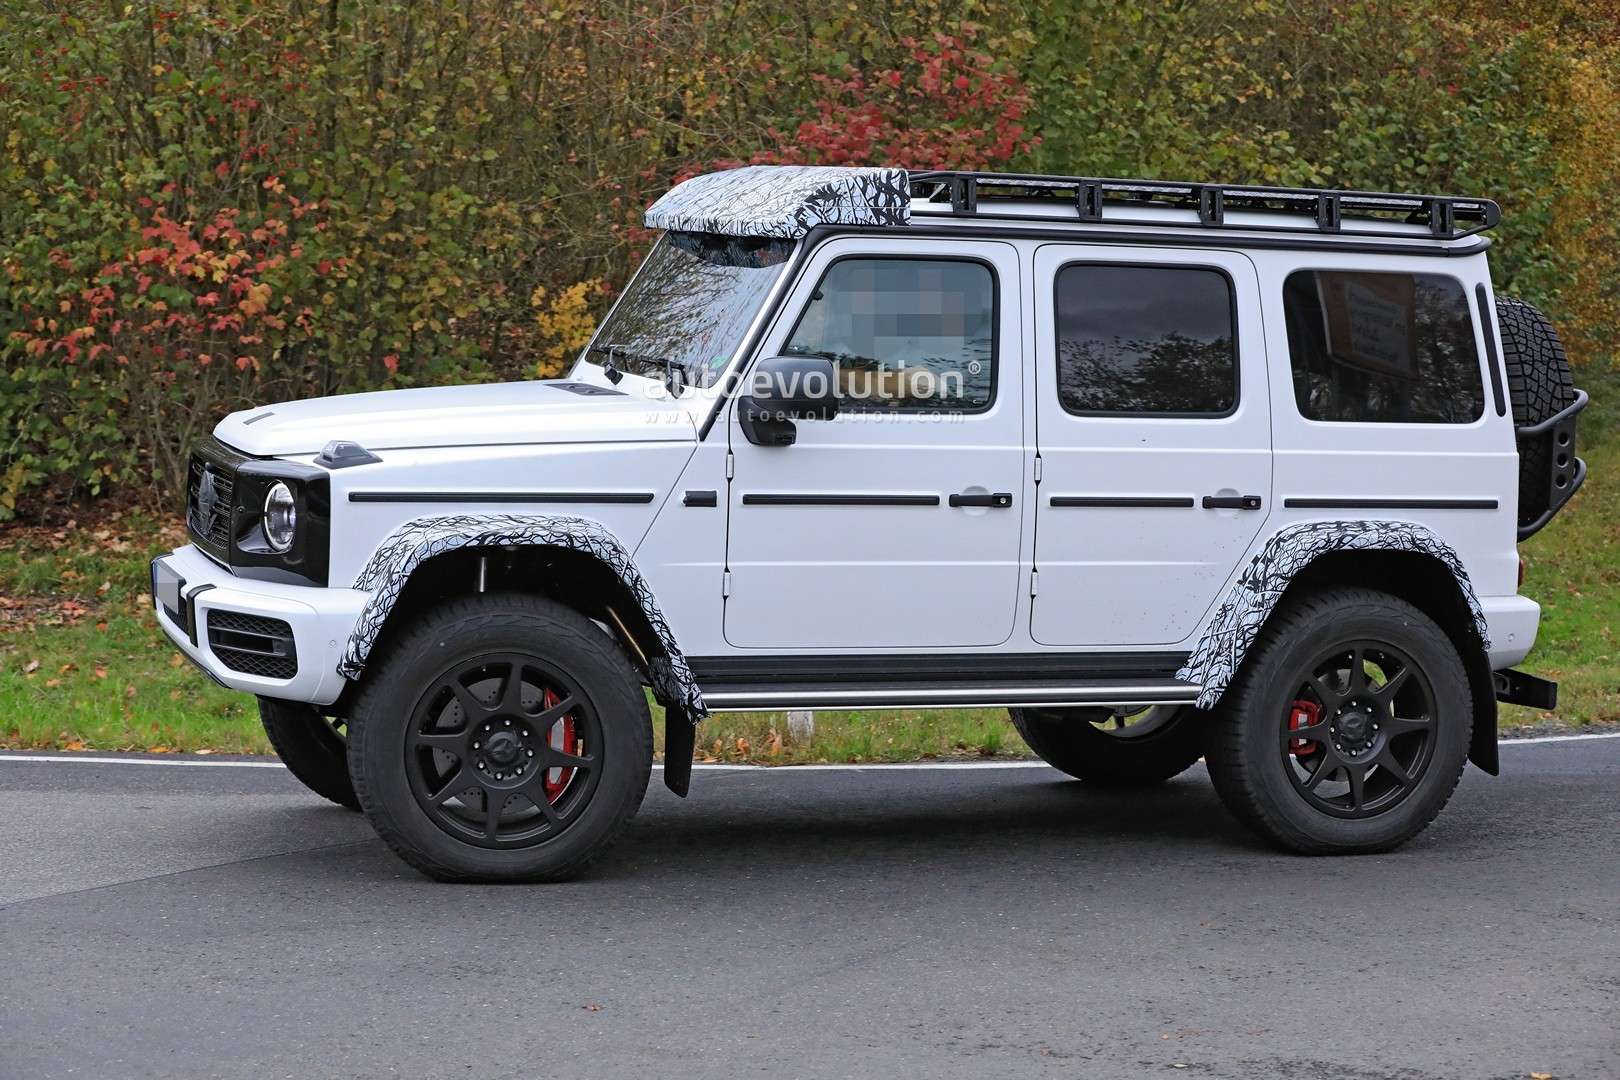 2022 MercedesBenz G 550 4x4 Squared Spied Looking Like an Expensive